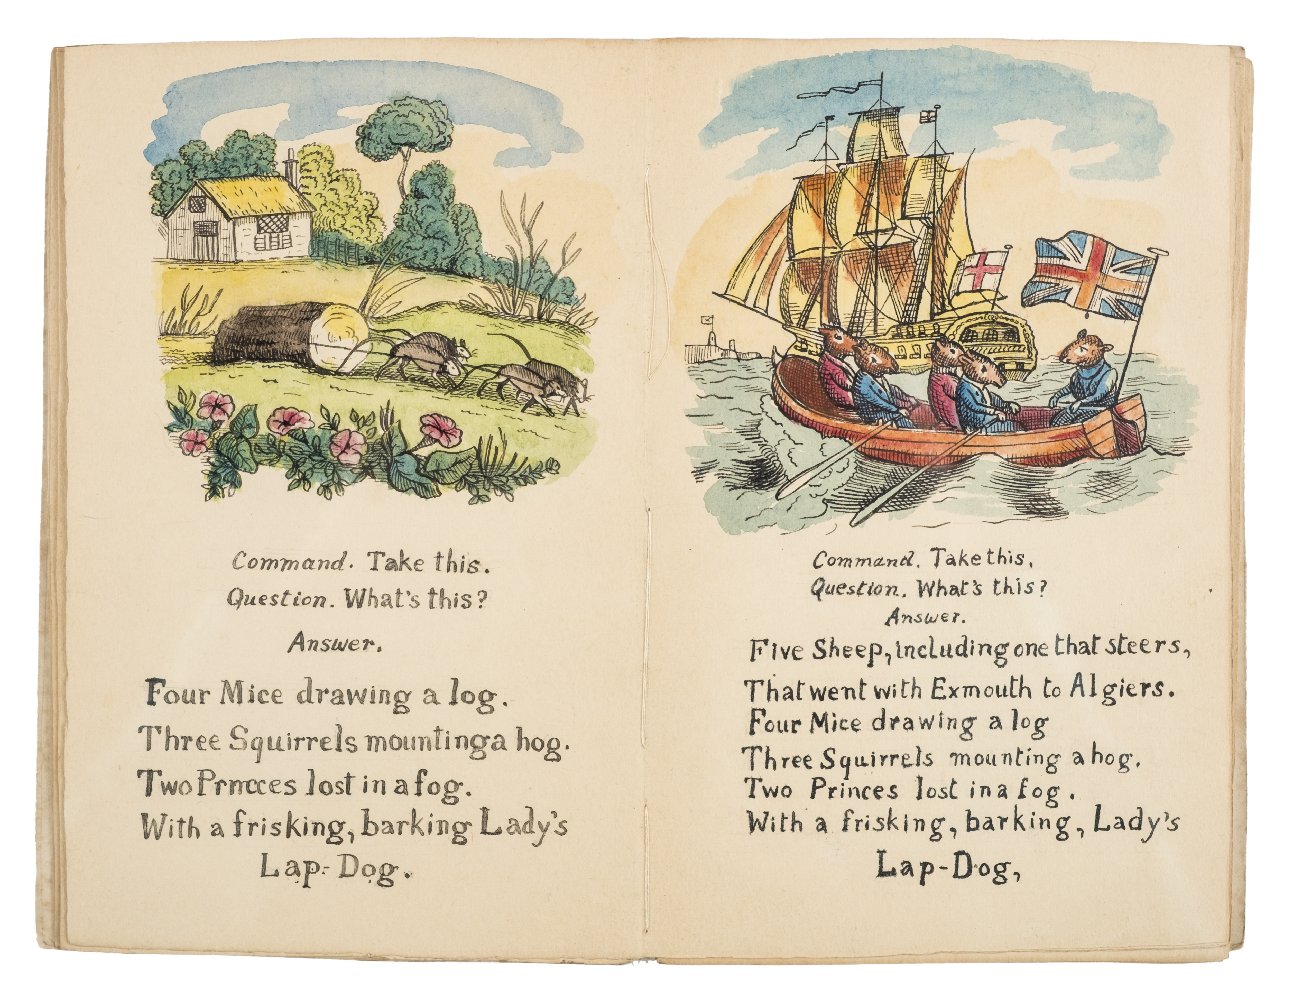 Manuscript. The Frisking, Barking, Lady's Lap-Dog. A New Game of Questions and Commands. 1818. 1808,